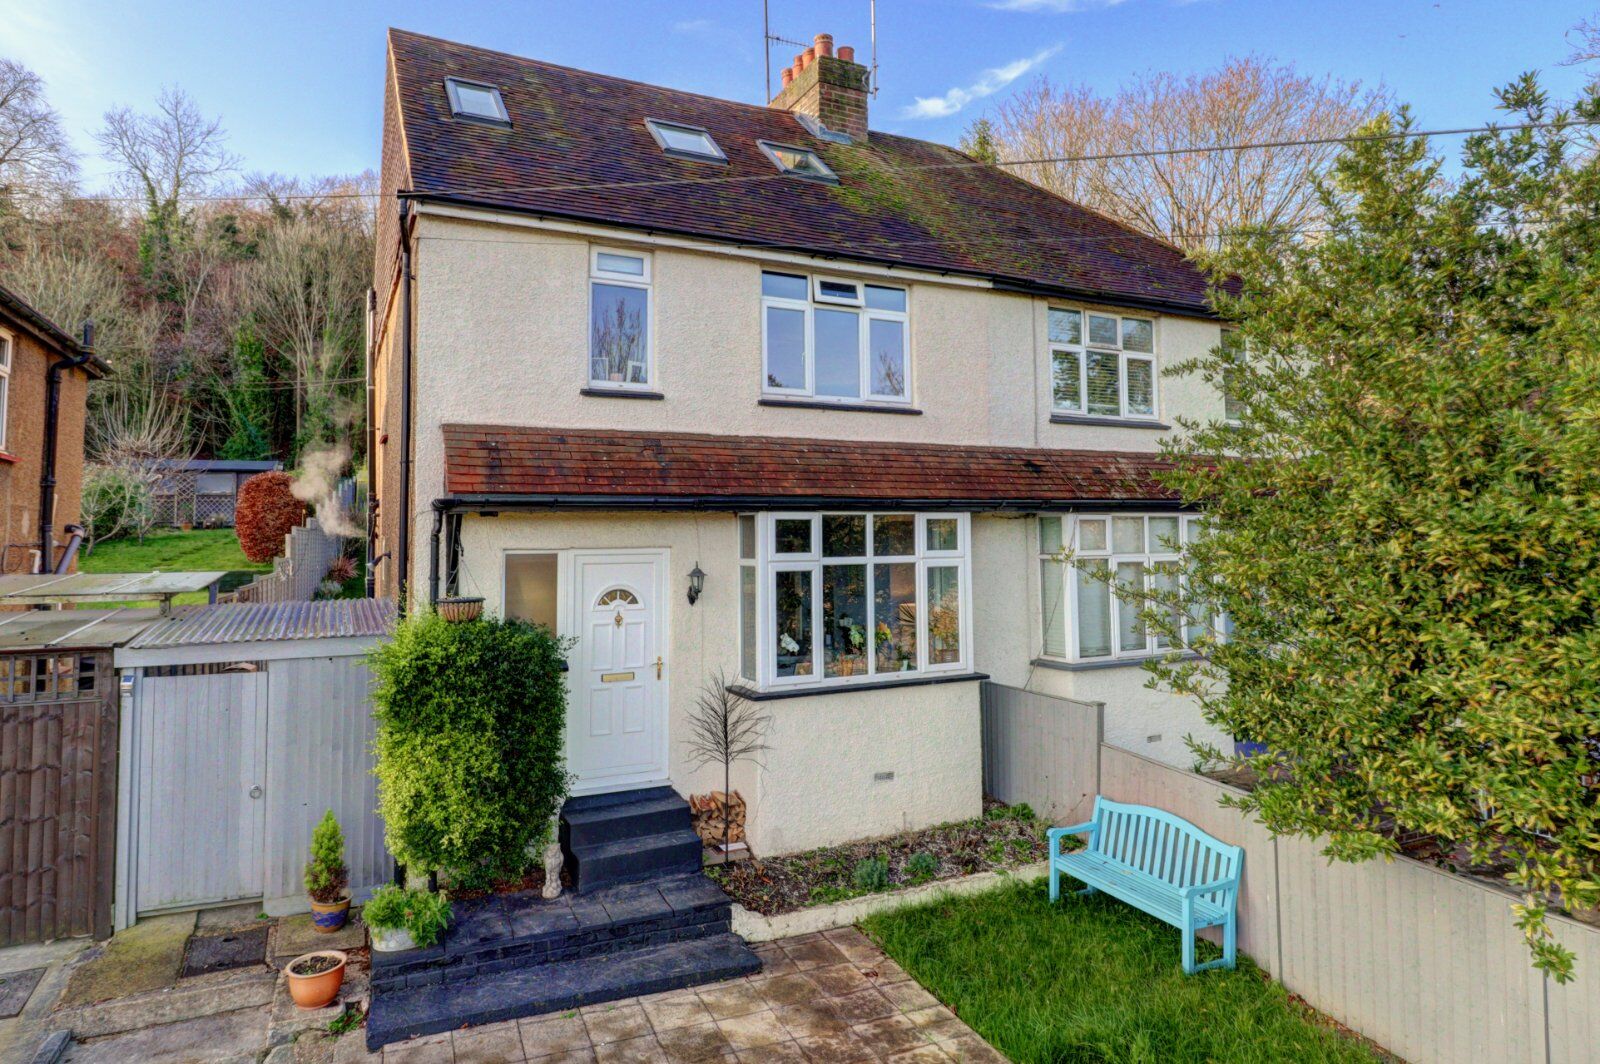 3 bedroom semi detached house for sale Kingsmead Road, High Wycombe, HP11, main image